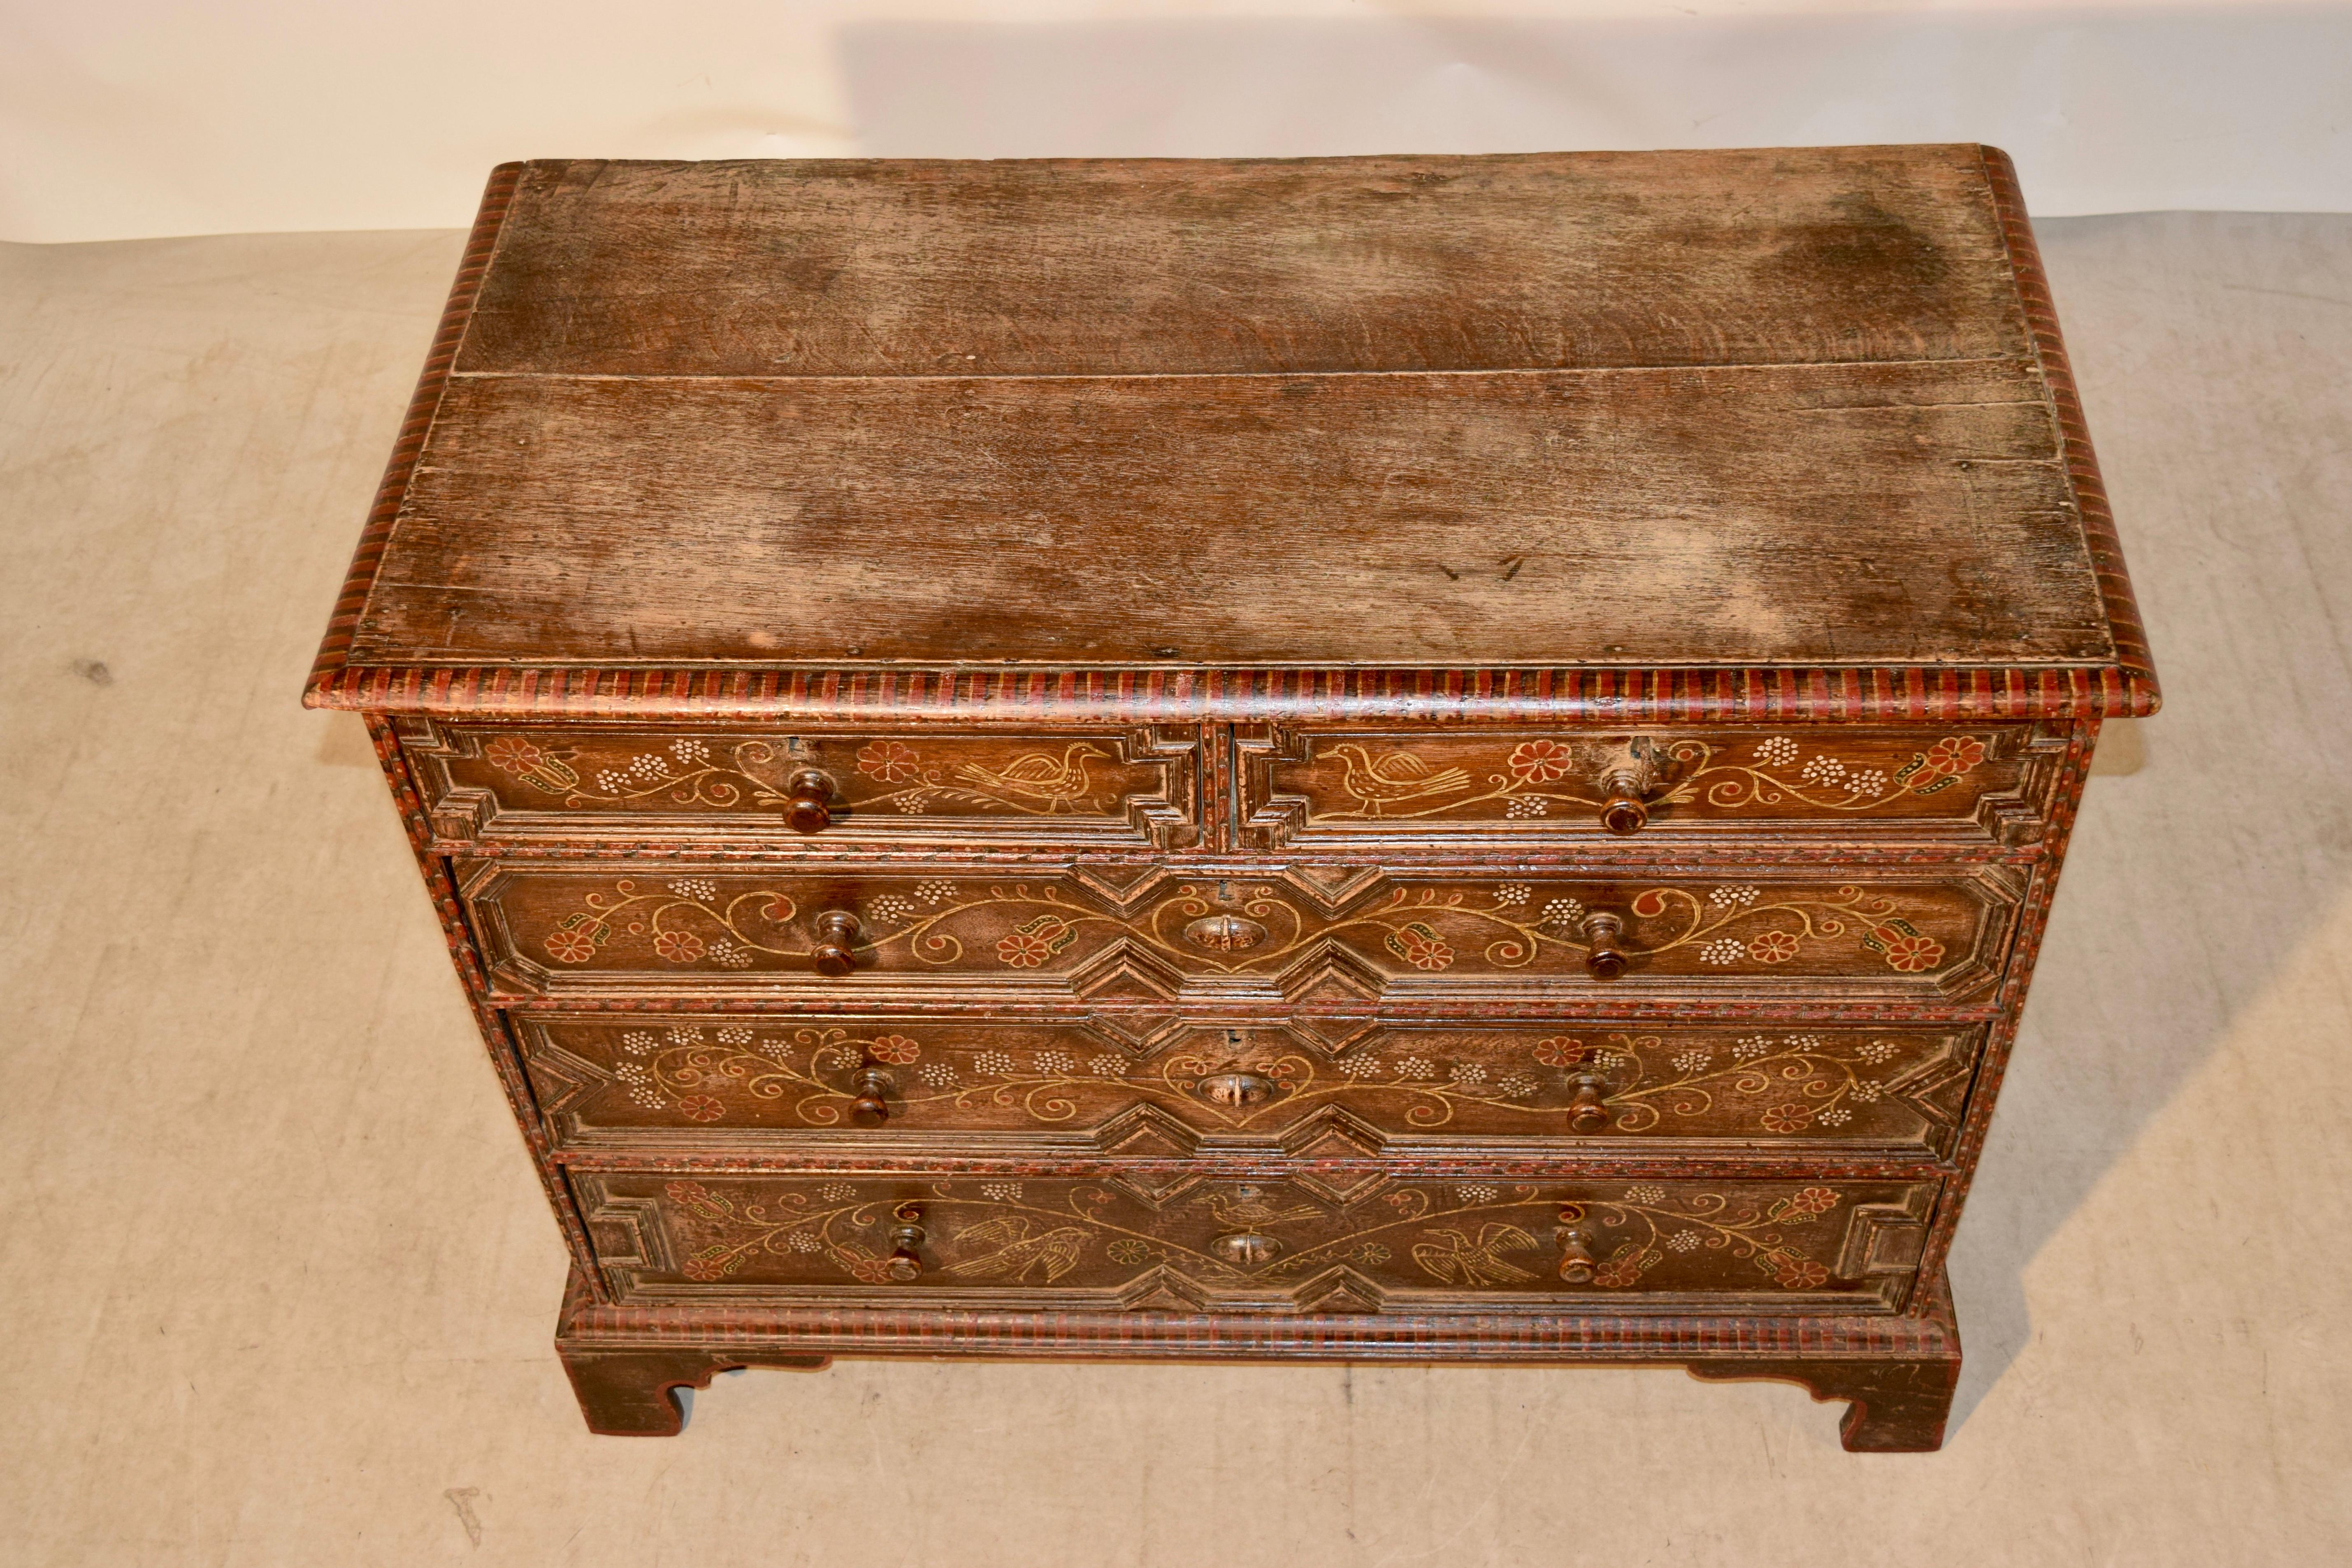 Hand-Painted 18th Century Decorated Oak Chest of Drawers